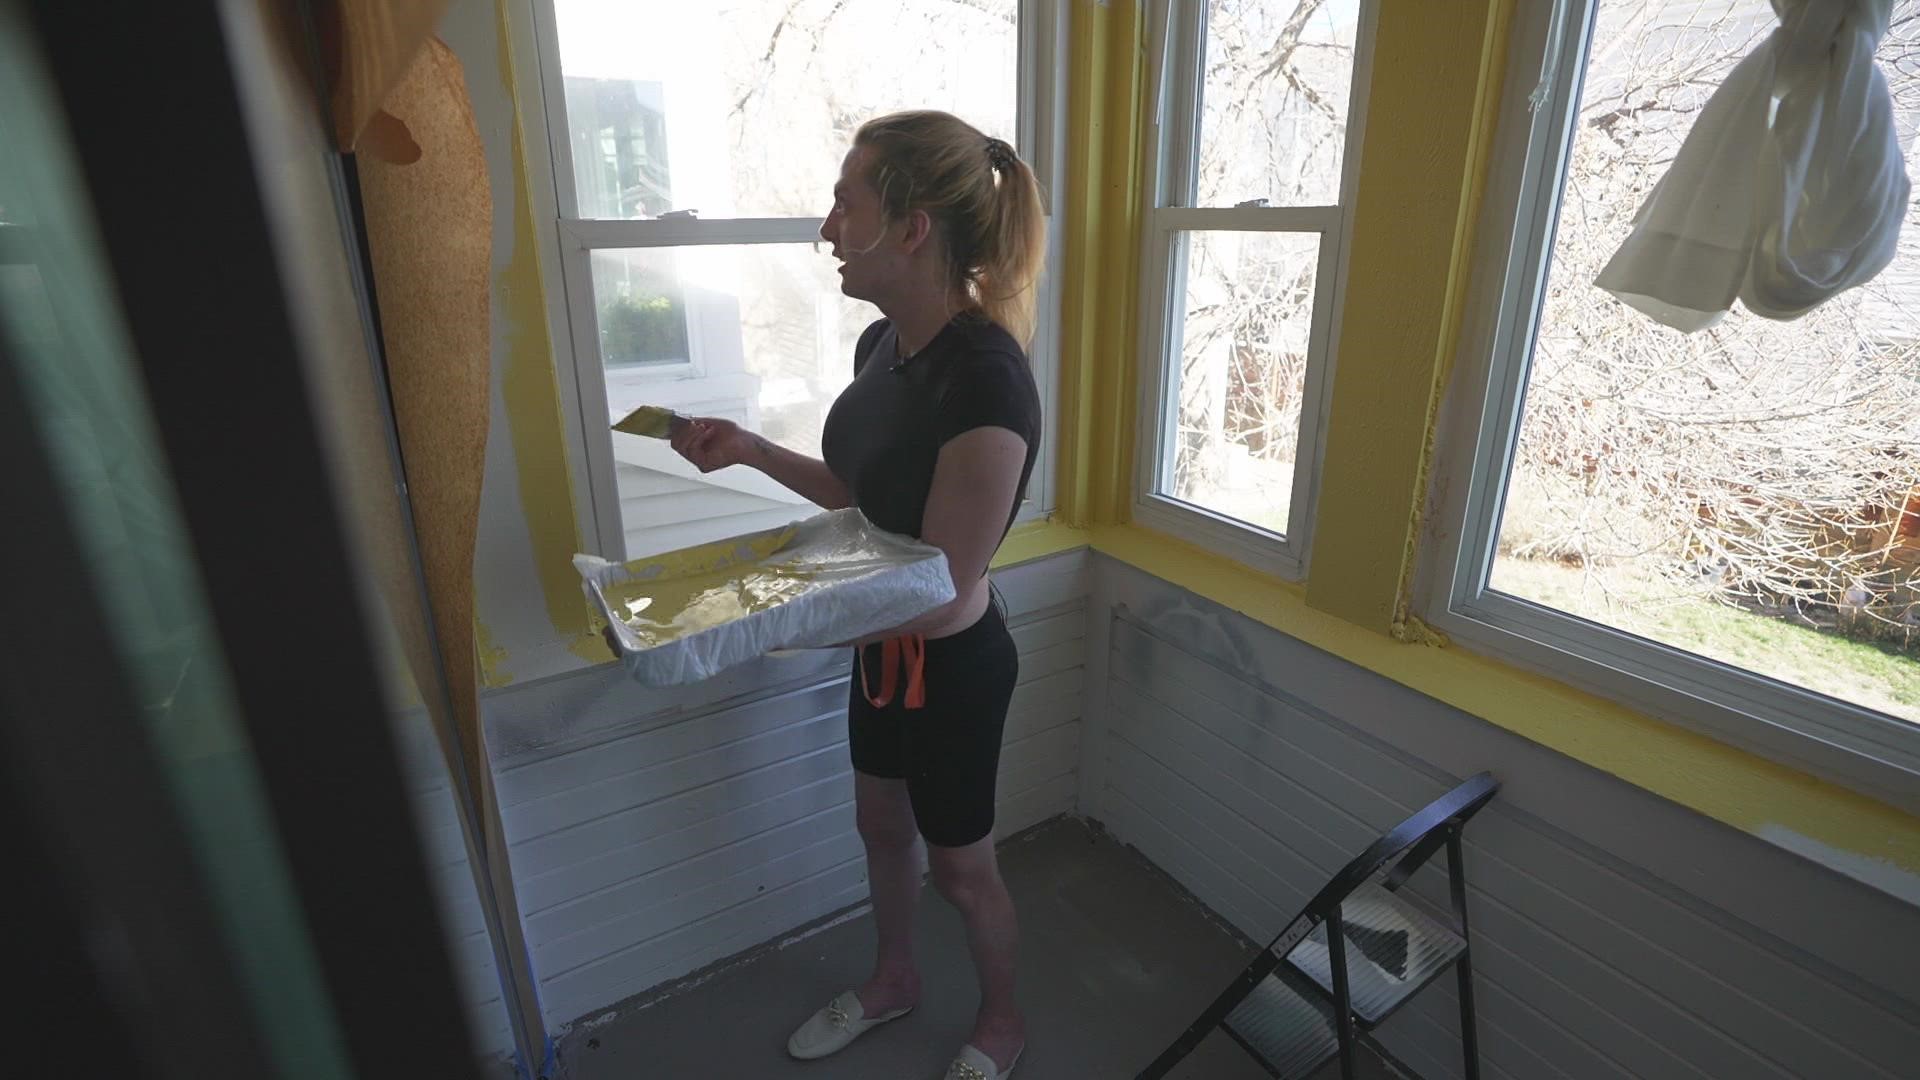 Loving suggested that the two paint the sunroom together a few weeks before she died at Club Q. On Sunday, her friend painted the sunroom to keep her memory alive.